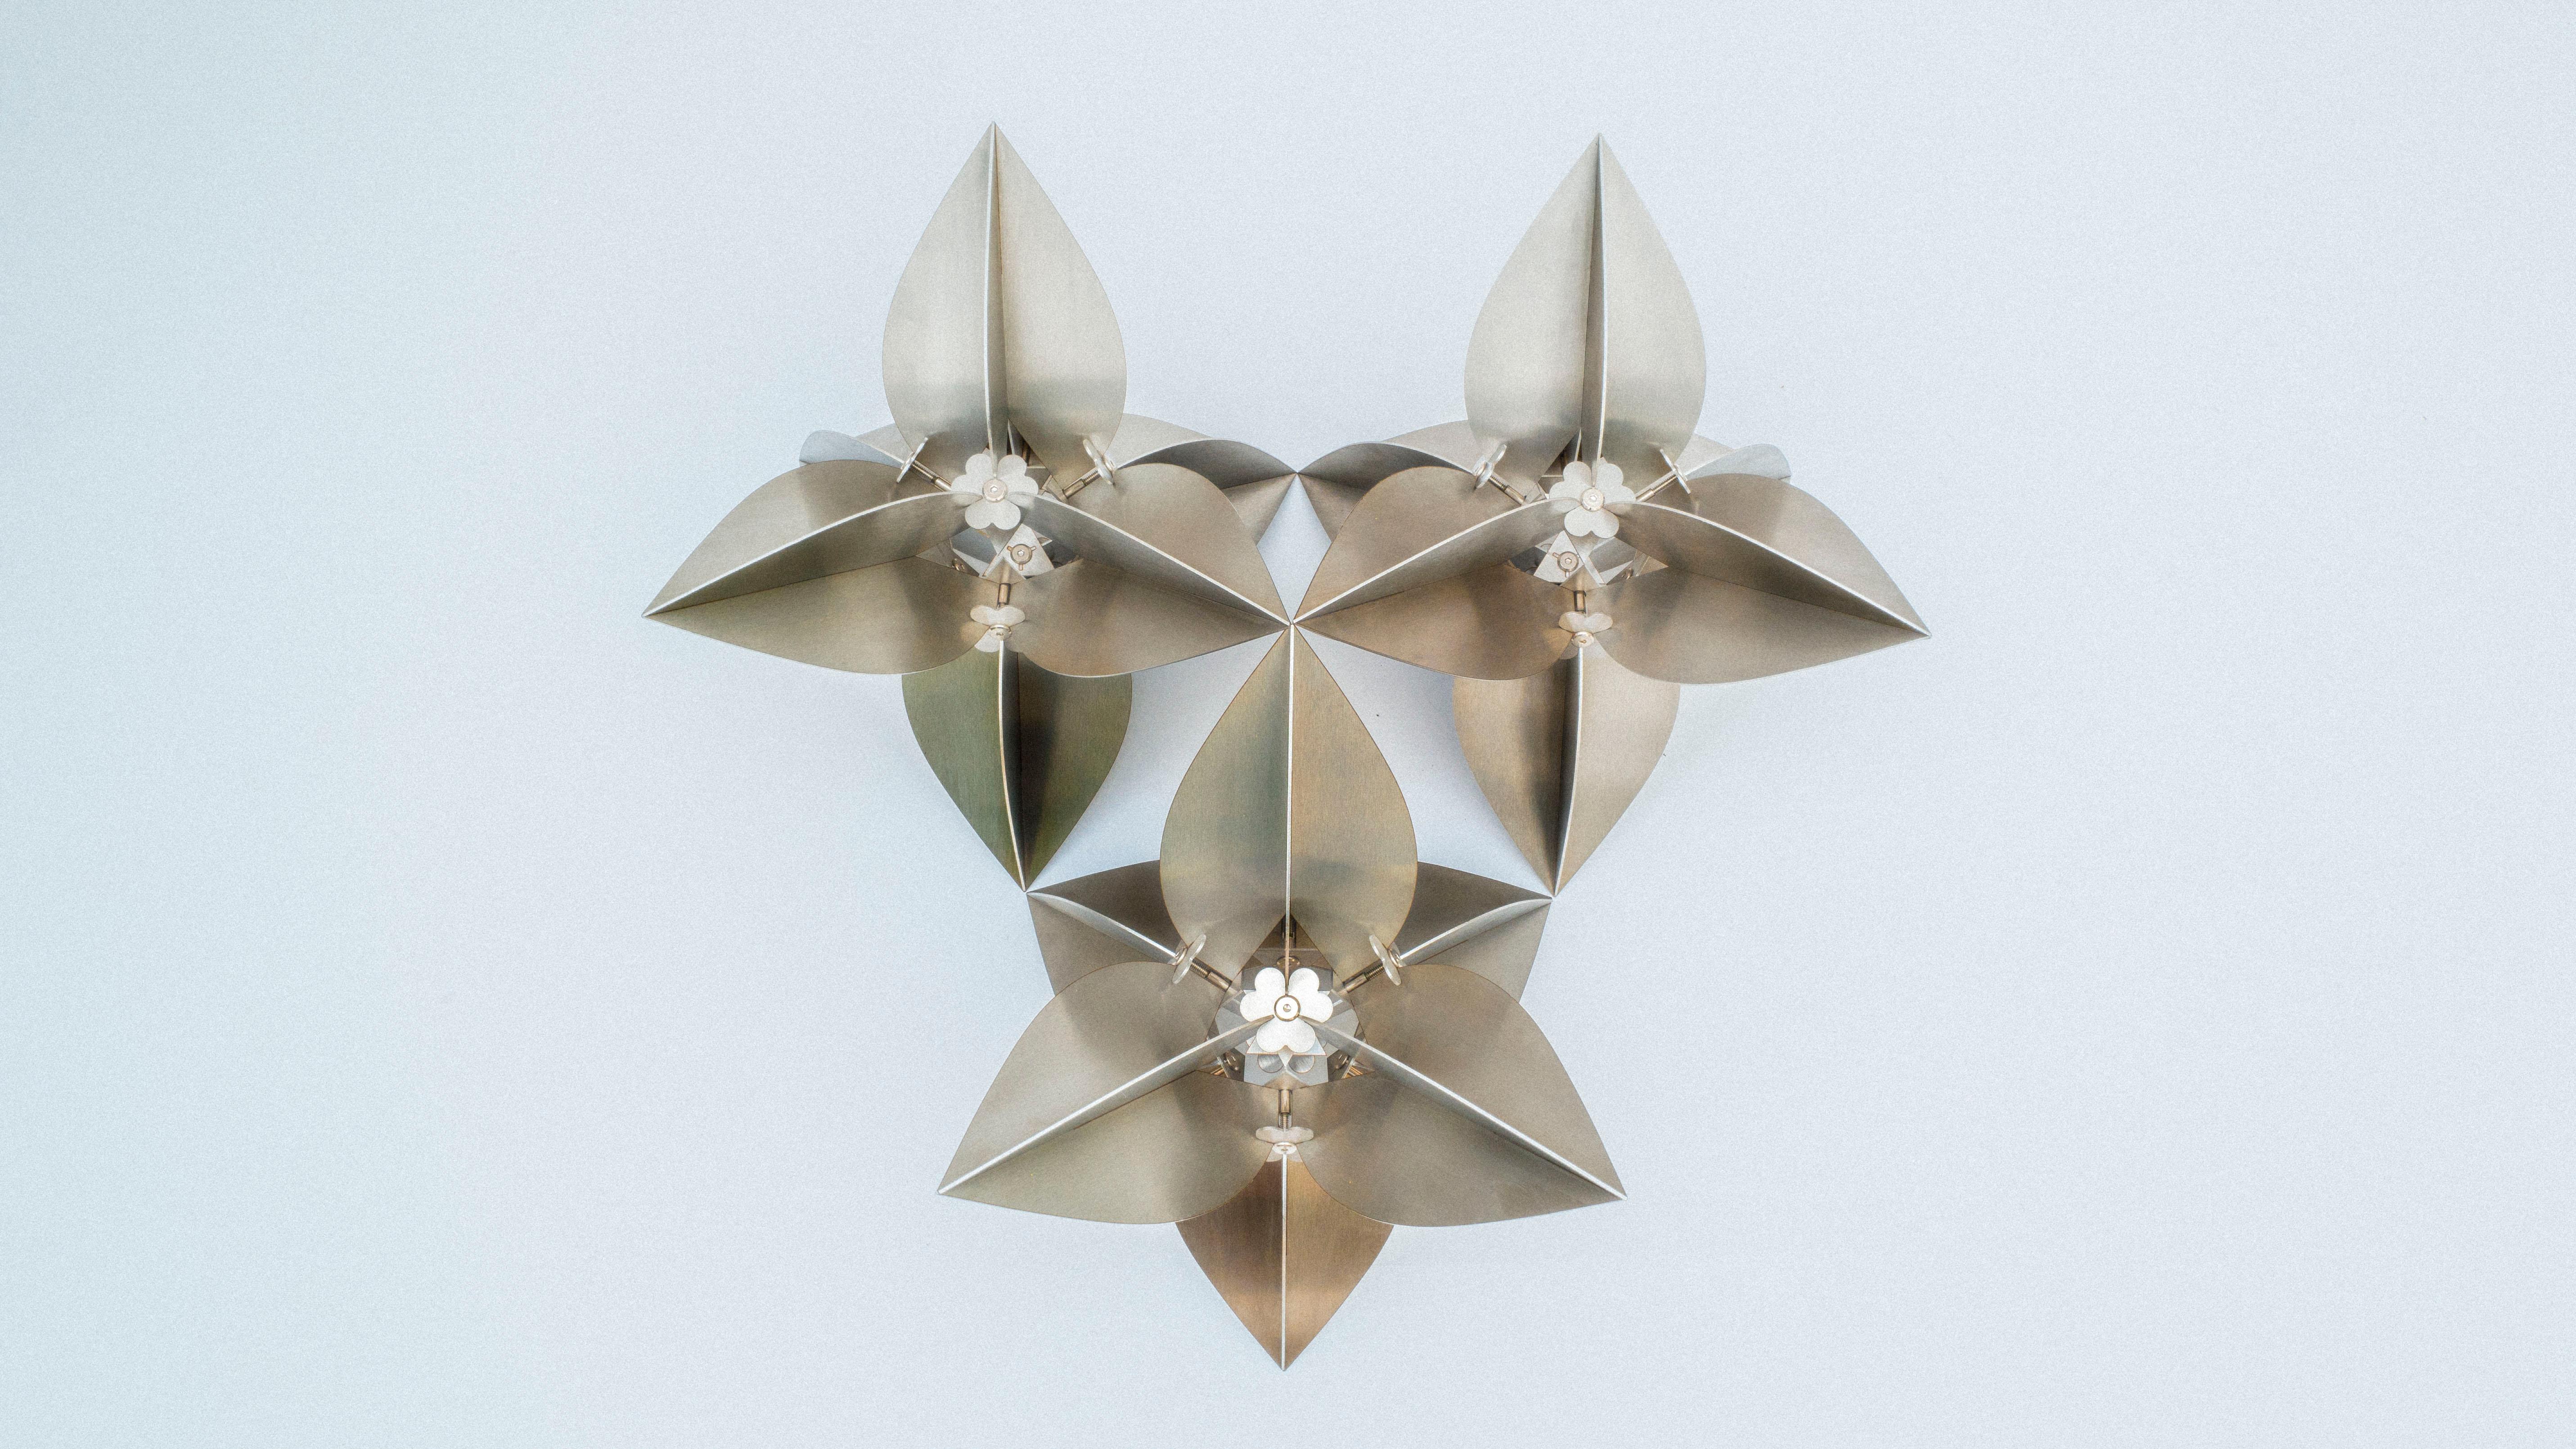 Presented at Zona Maco 2019, this stainless steel piece forms an apparent fragile yet robust flower shape that reminds us of the bougainvillea, a typical three-petal Mexican flower used in Prehispanic medicine.

Bugambilia modules can be used